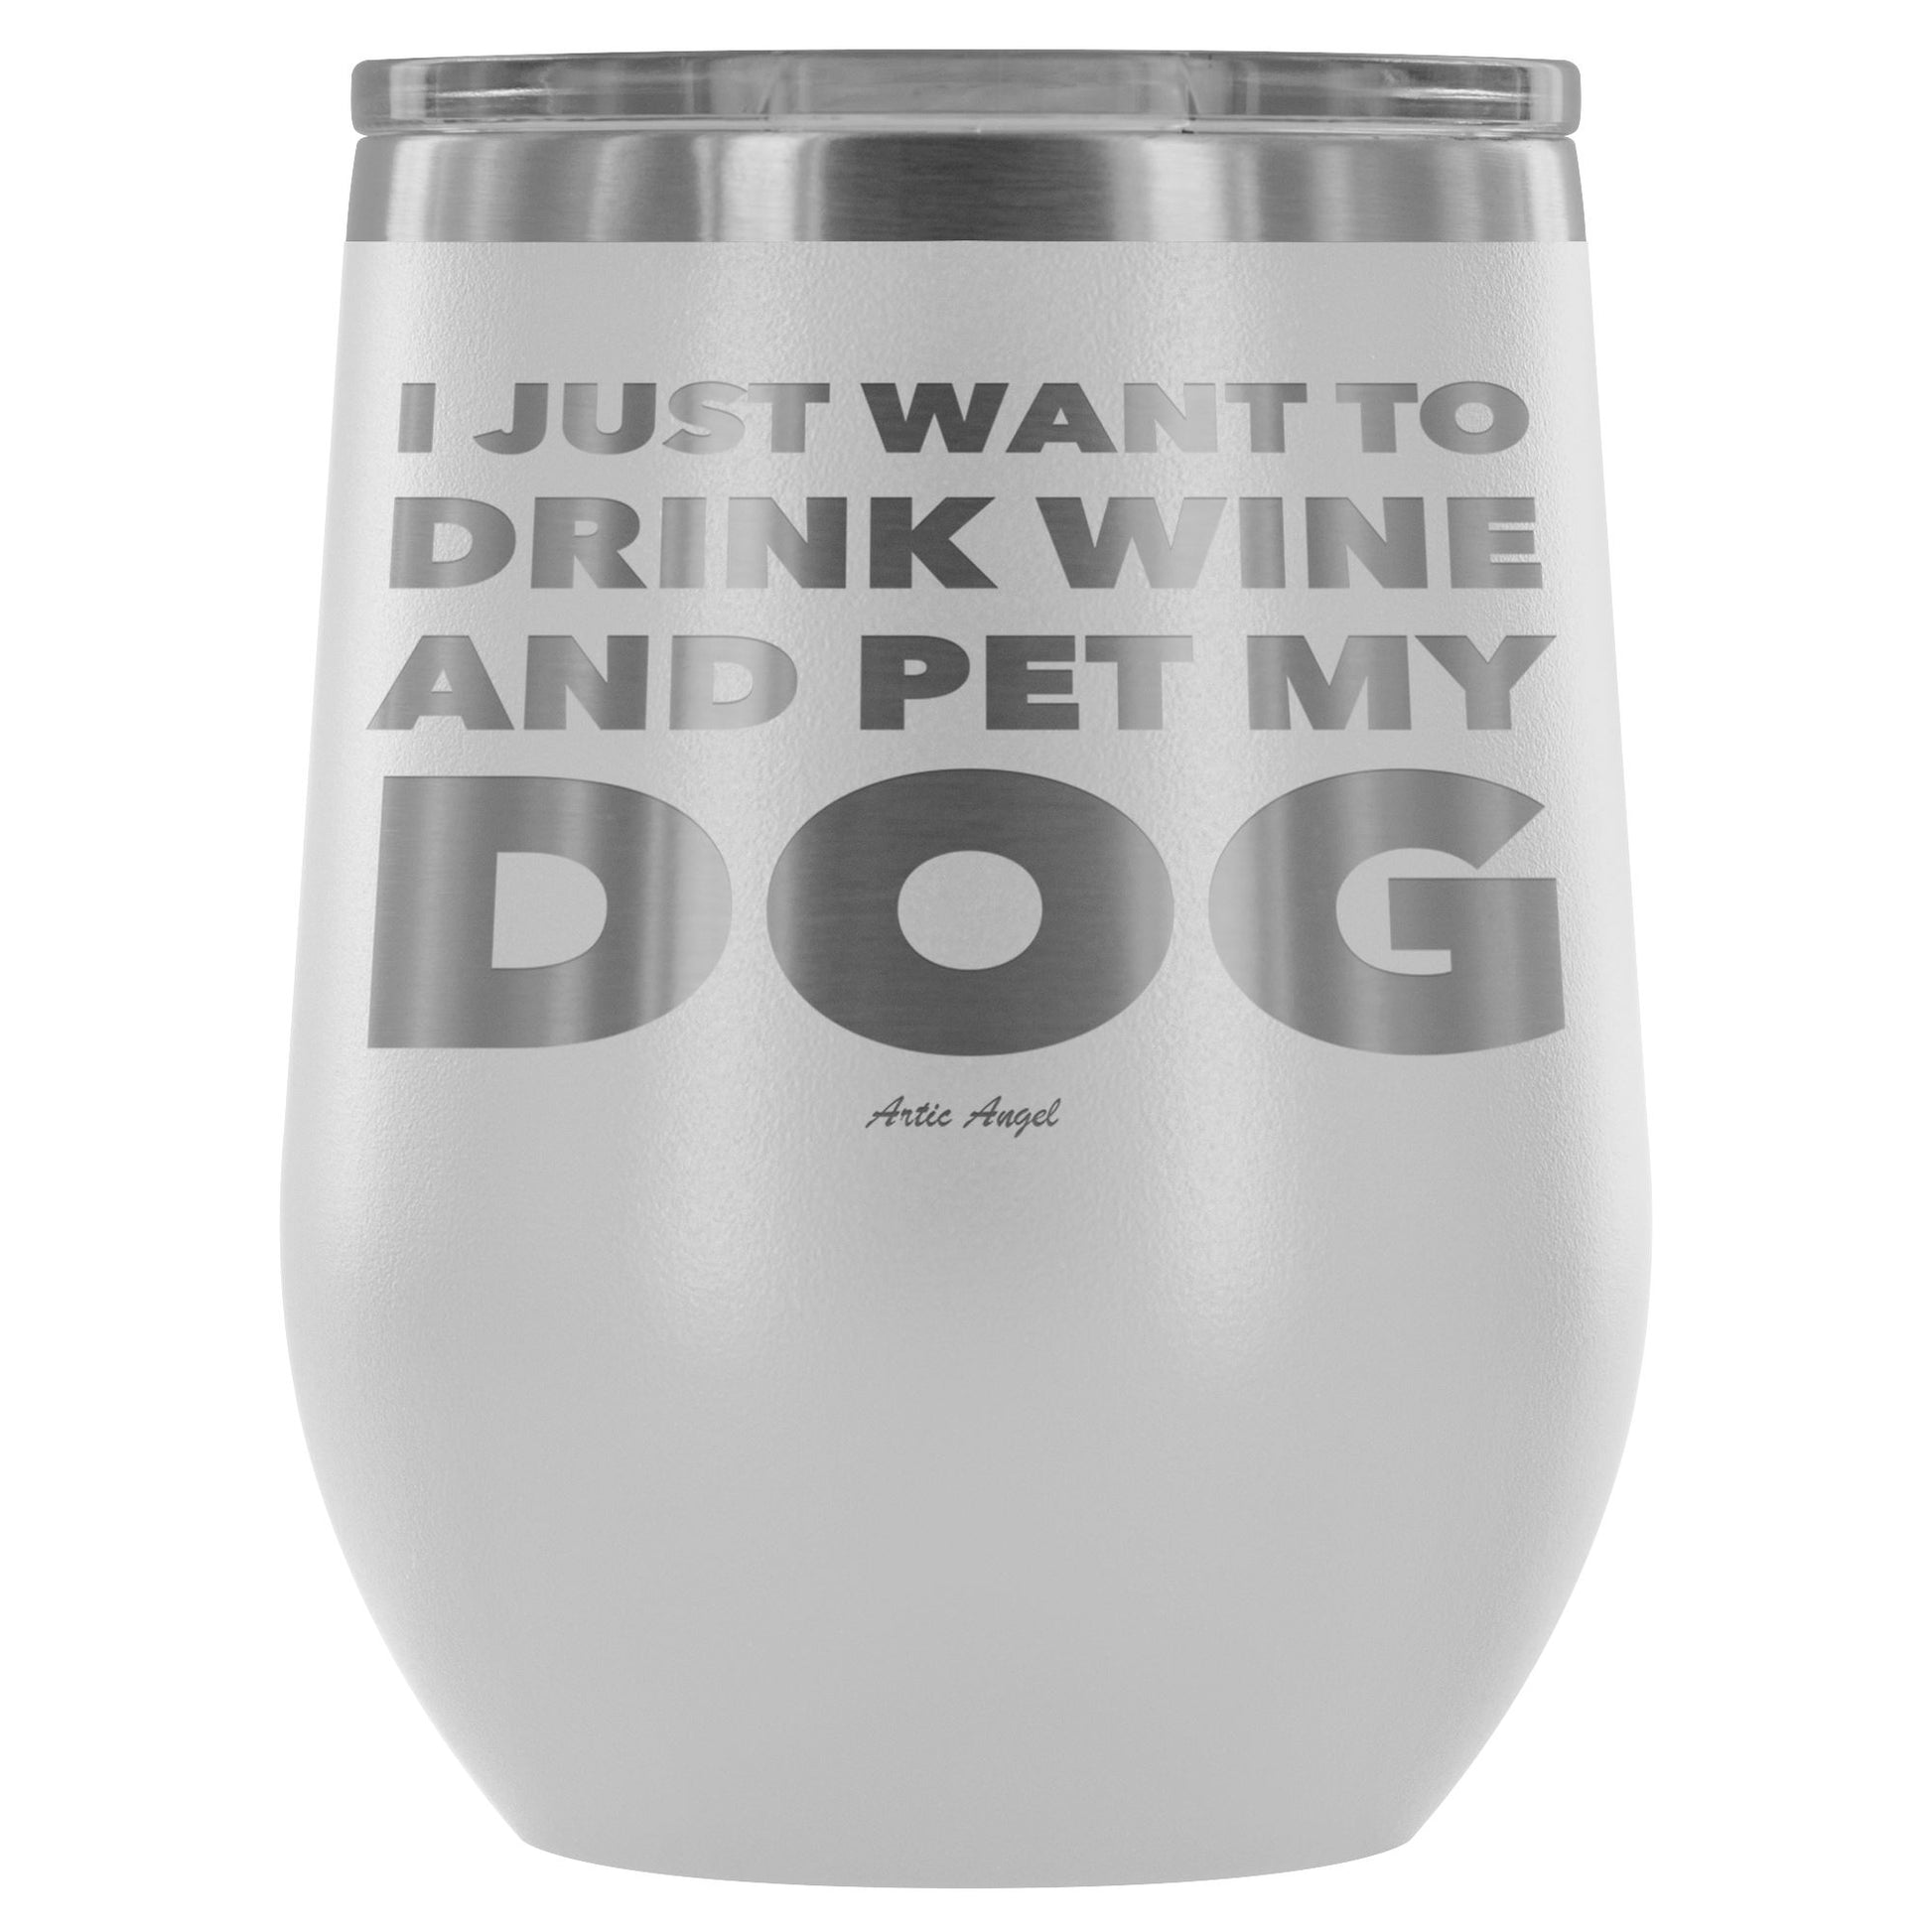 "I Just Want To Drink Wine And Pet My Dog" - Stemless Wine Cup Wine Tumbler White 